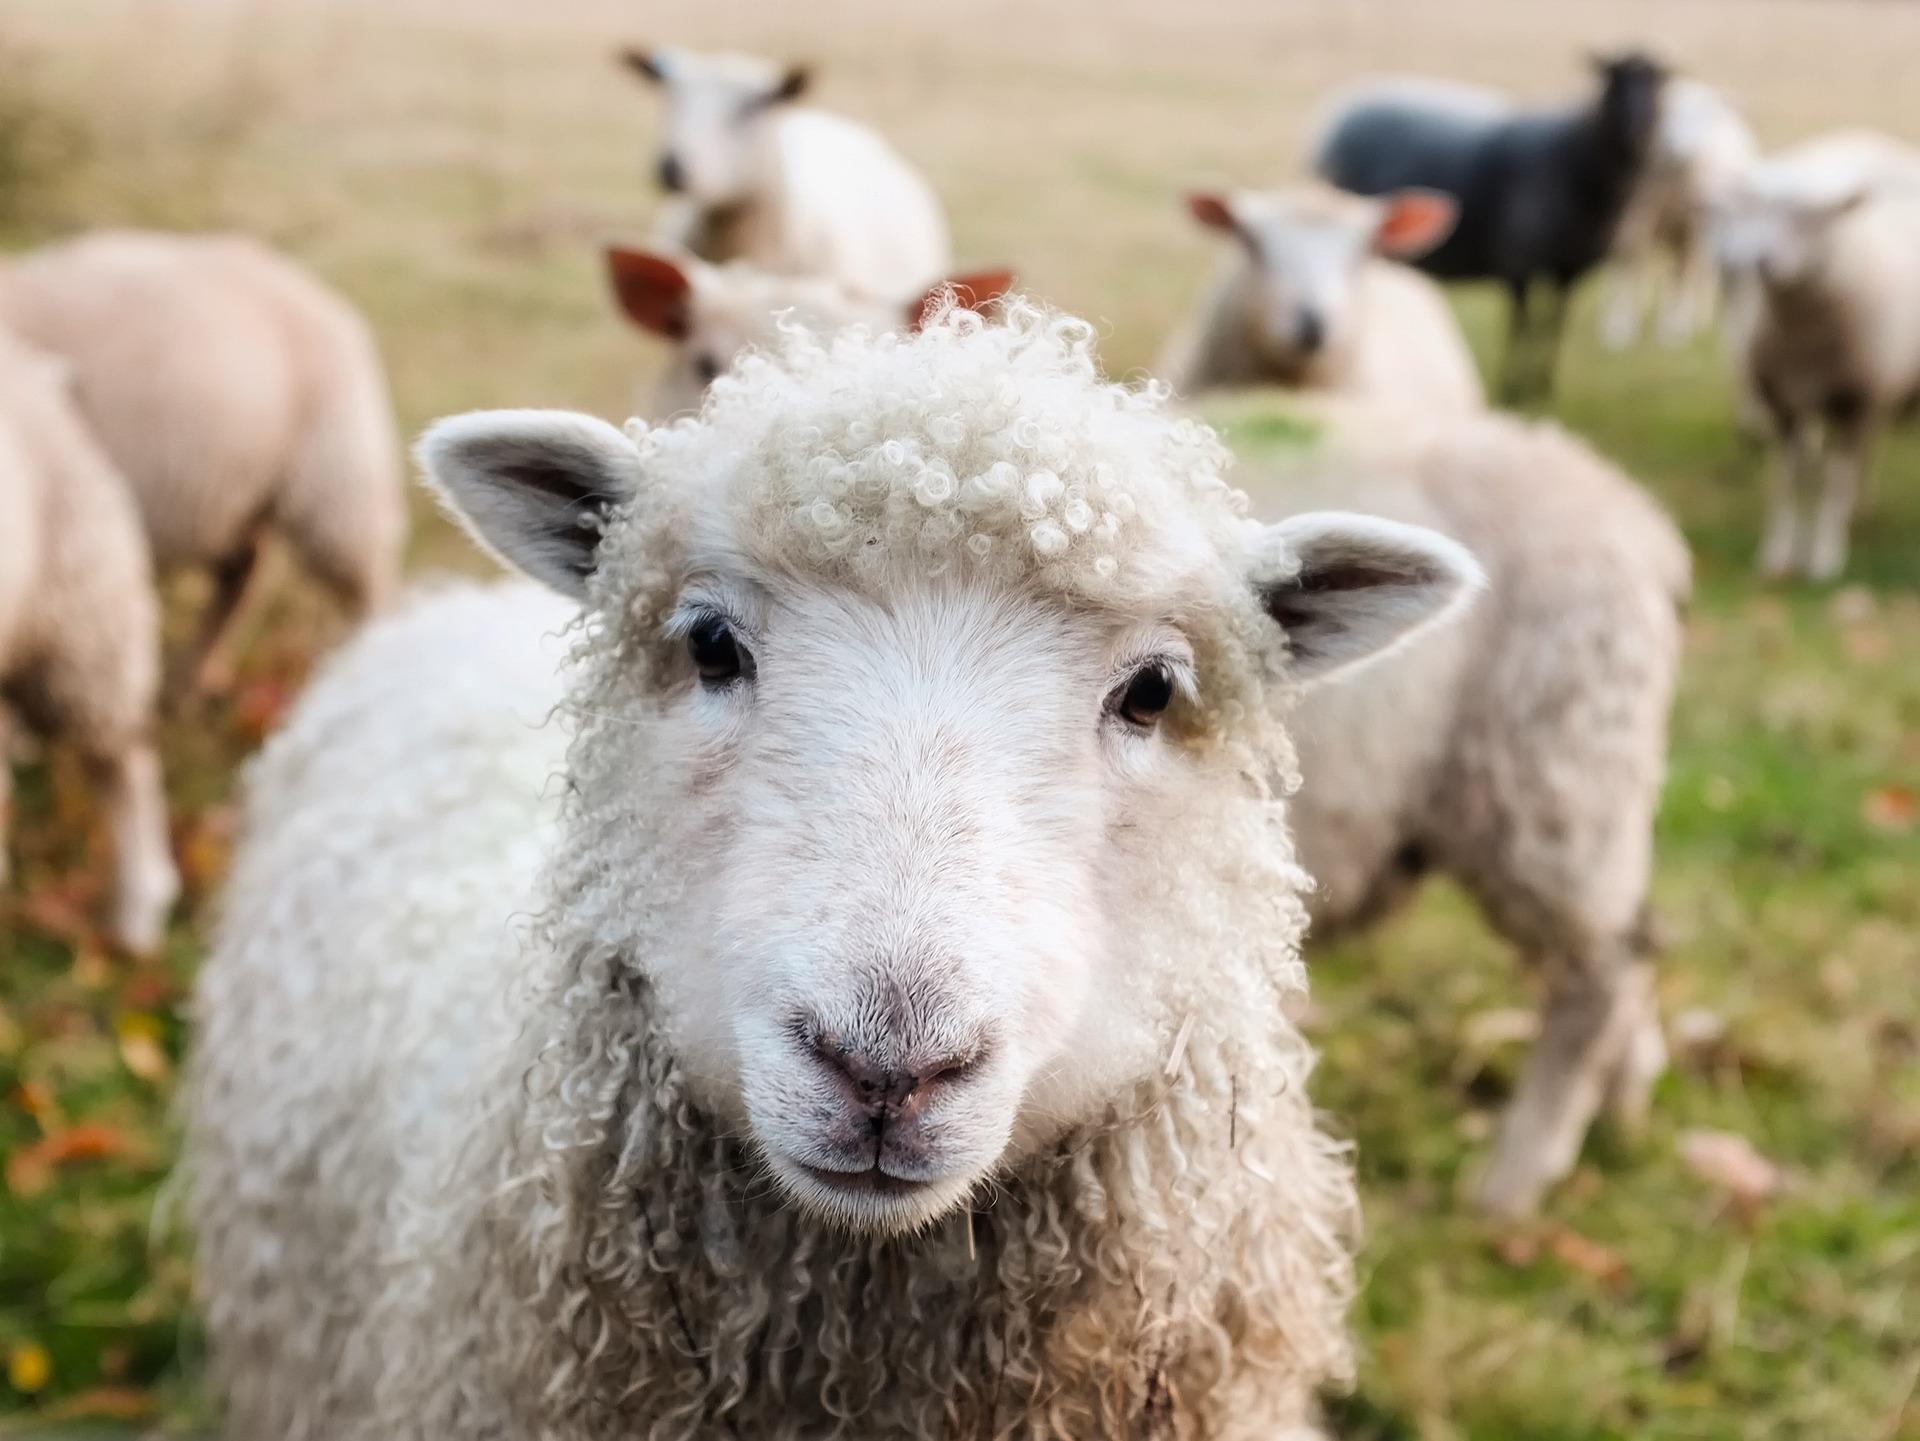 Image of a sheep looking deep into the camera